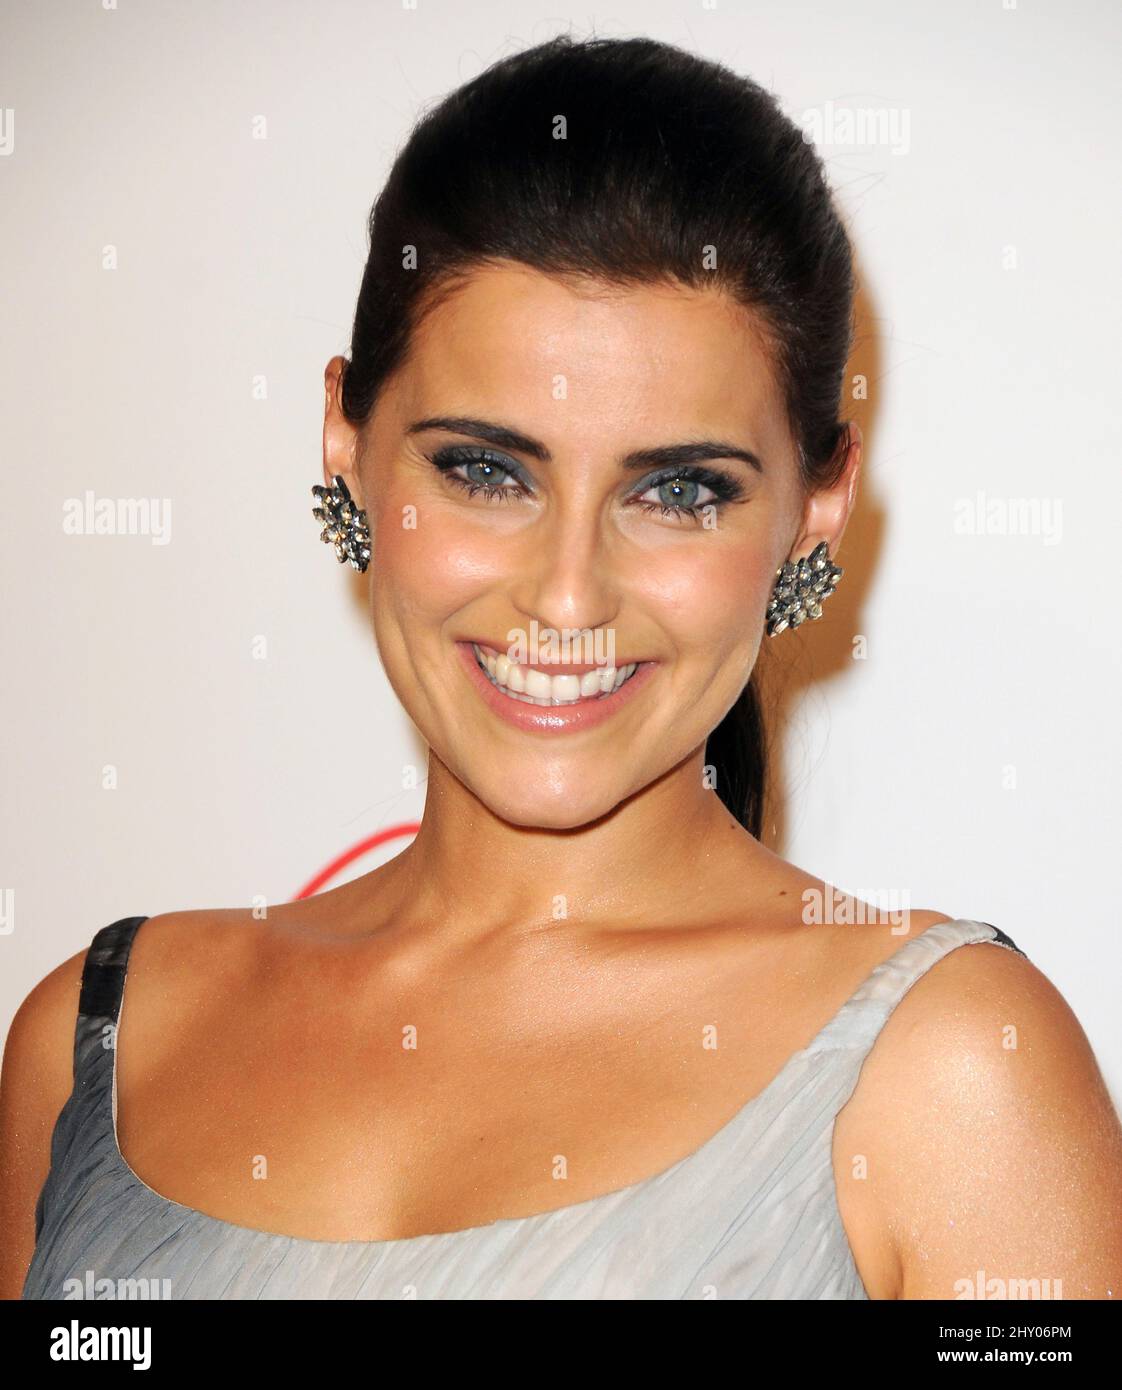 Nelly Furtado nimmt an der Latin Recording Academy Person of the Year Tribute to Caetano Veloso 2012 in der MGM Grand Garden Arena in Las Vegas, USA, Teil. Stockfoto